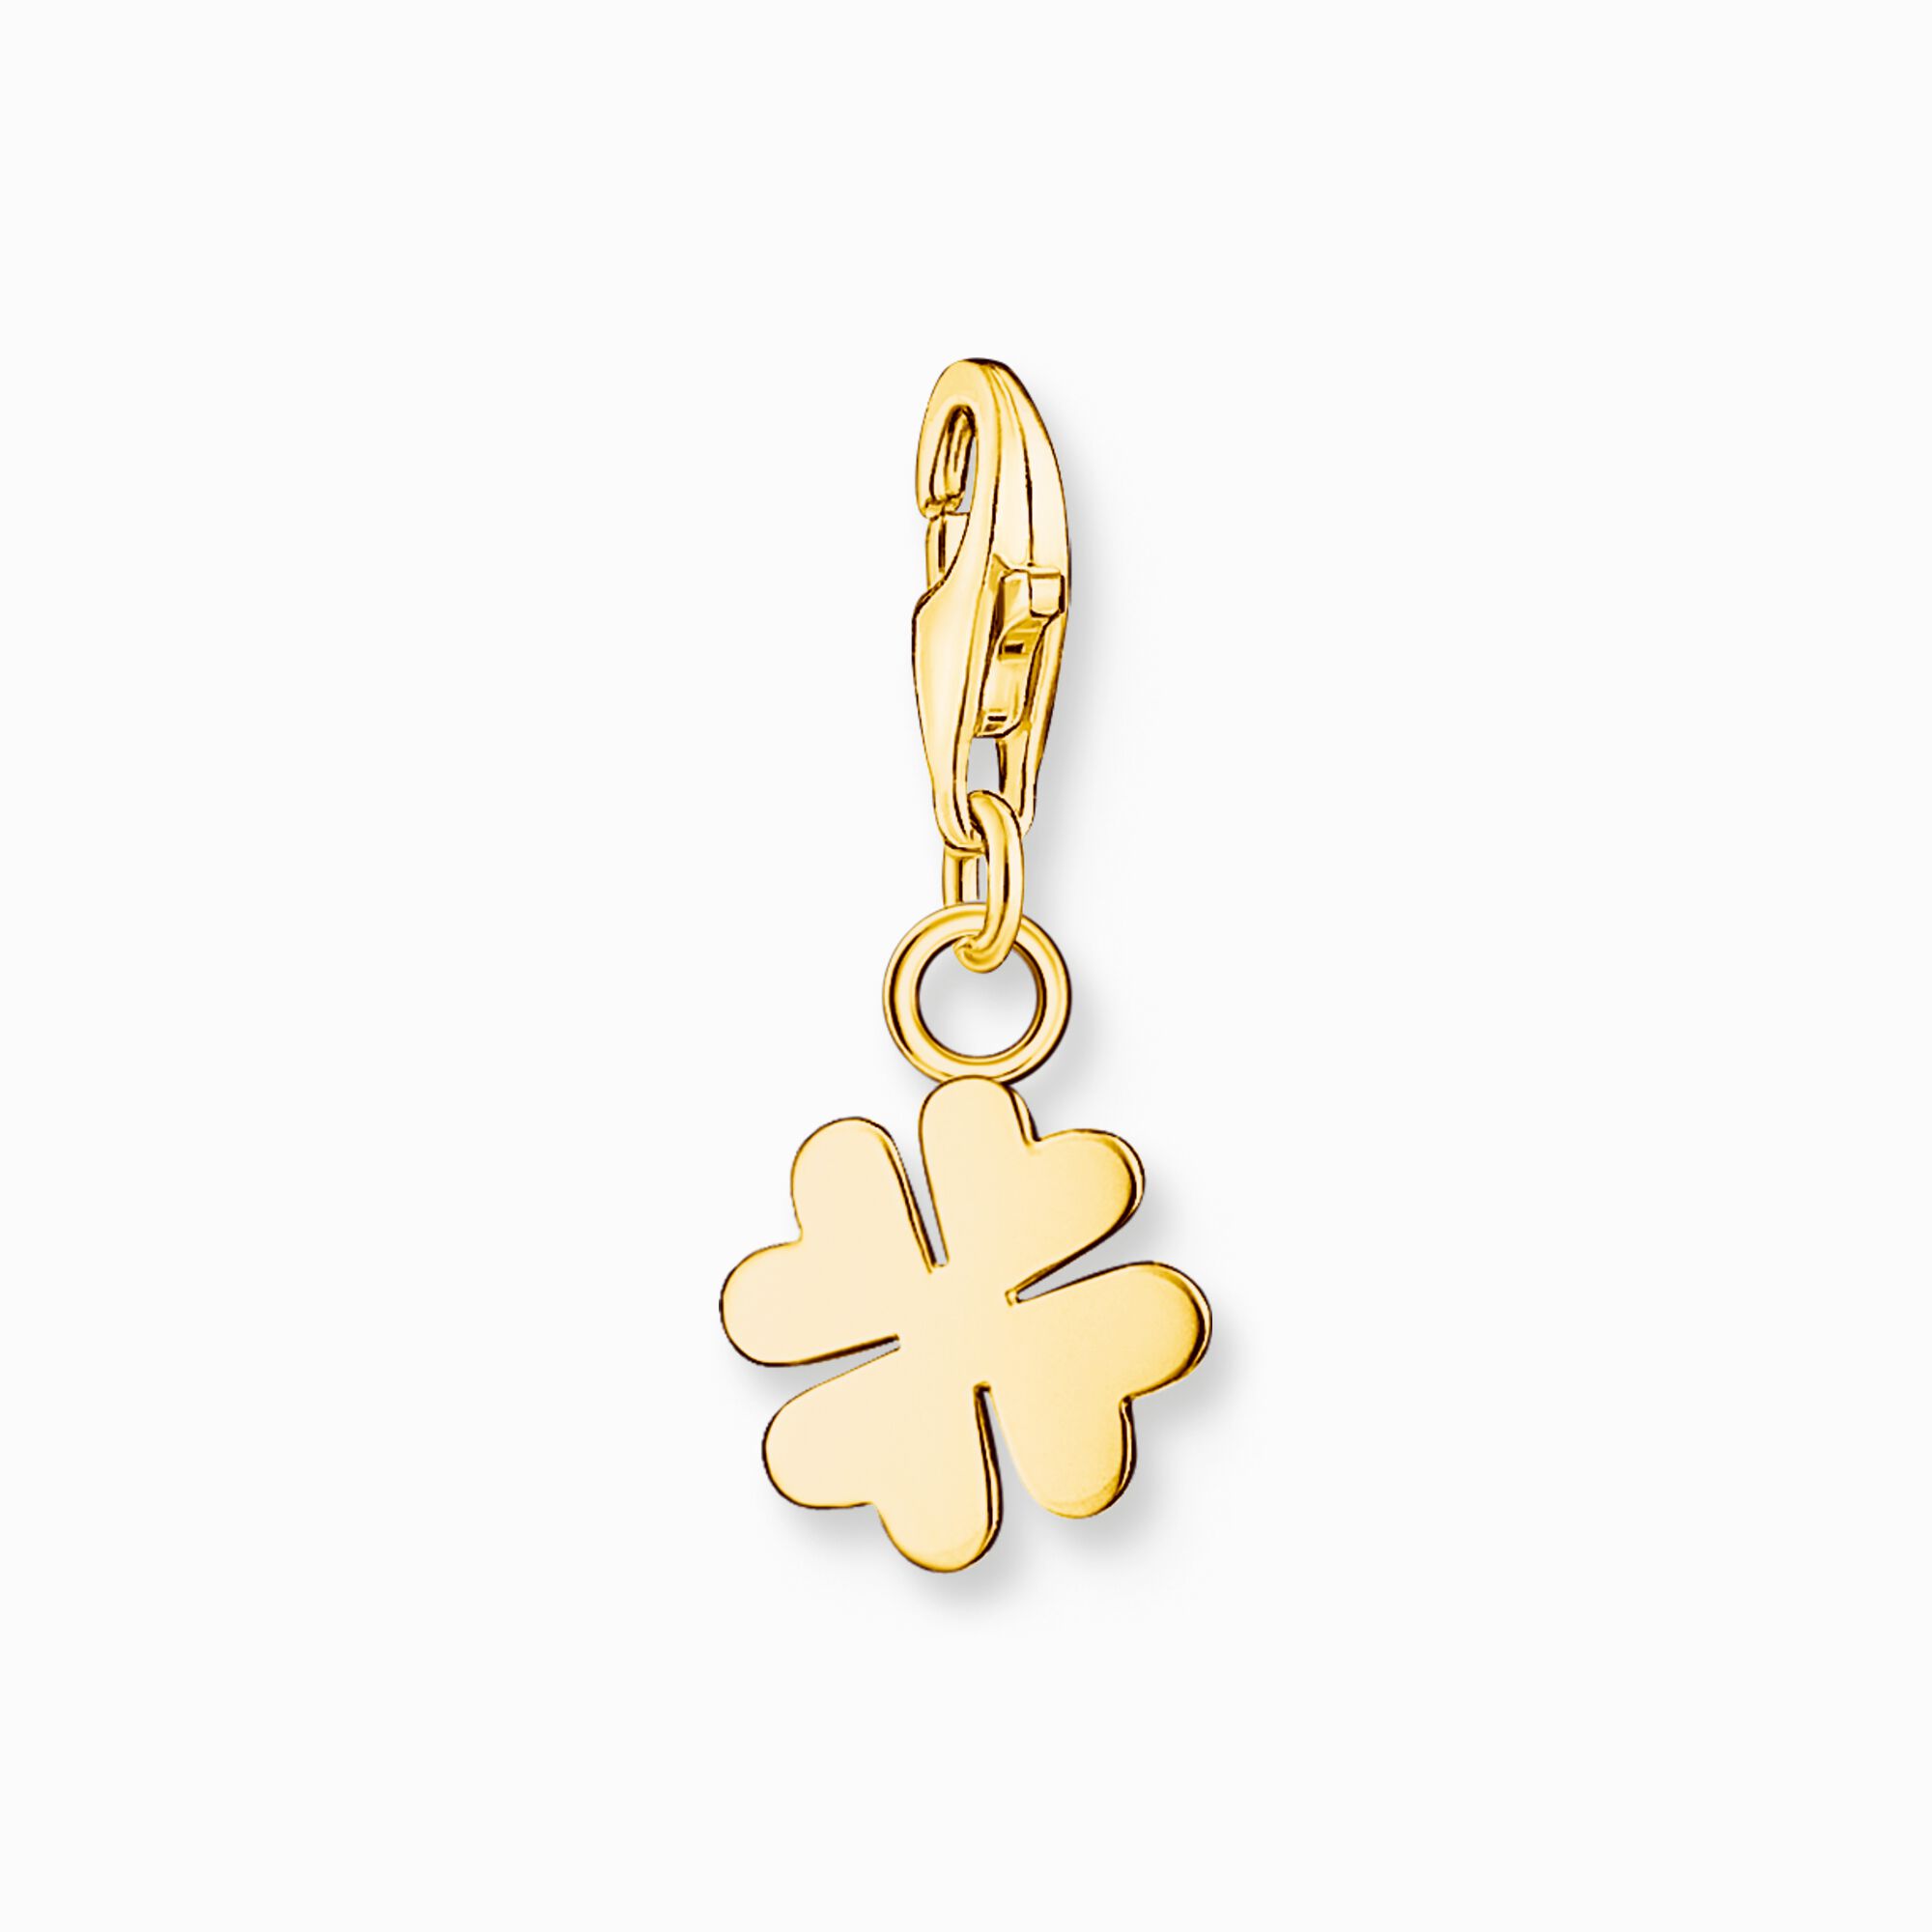 Charm pendant cloverleaf gold plated from the Charm Club collection in the THOMAS SABO online store